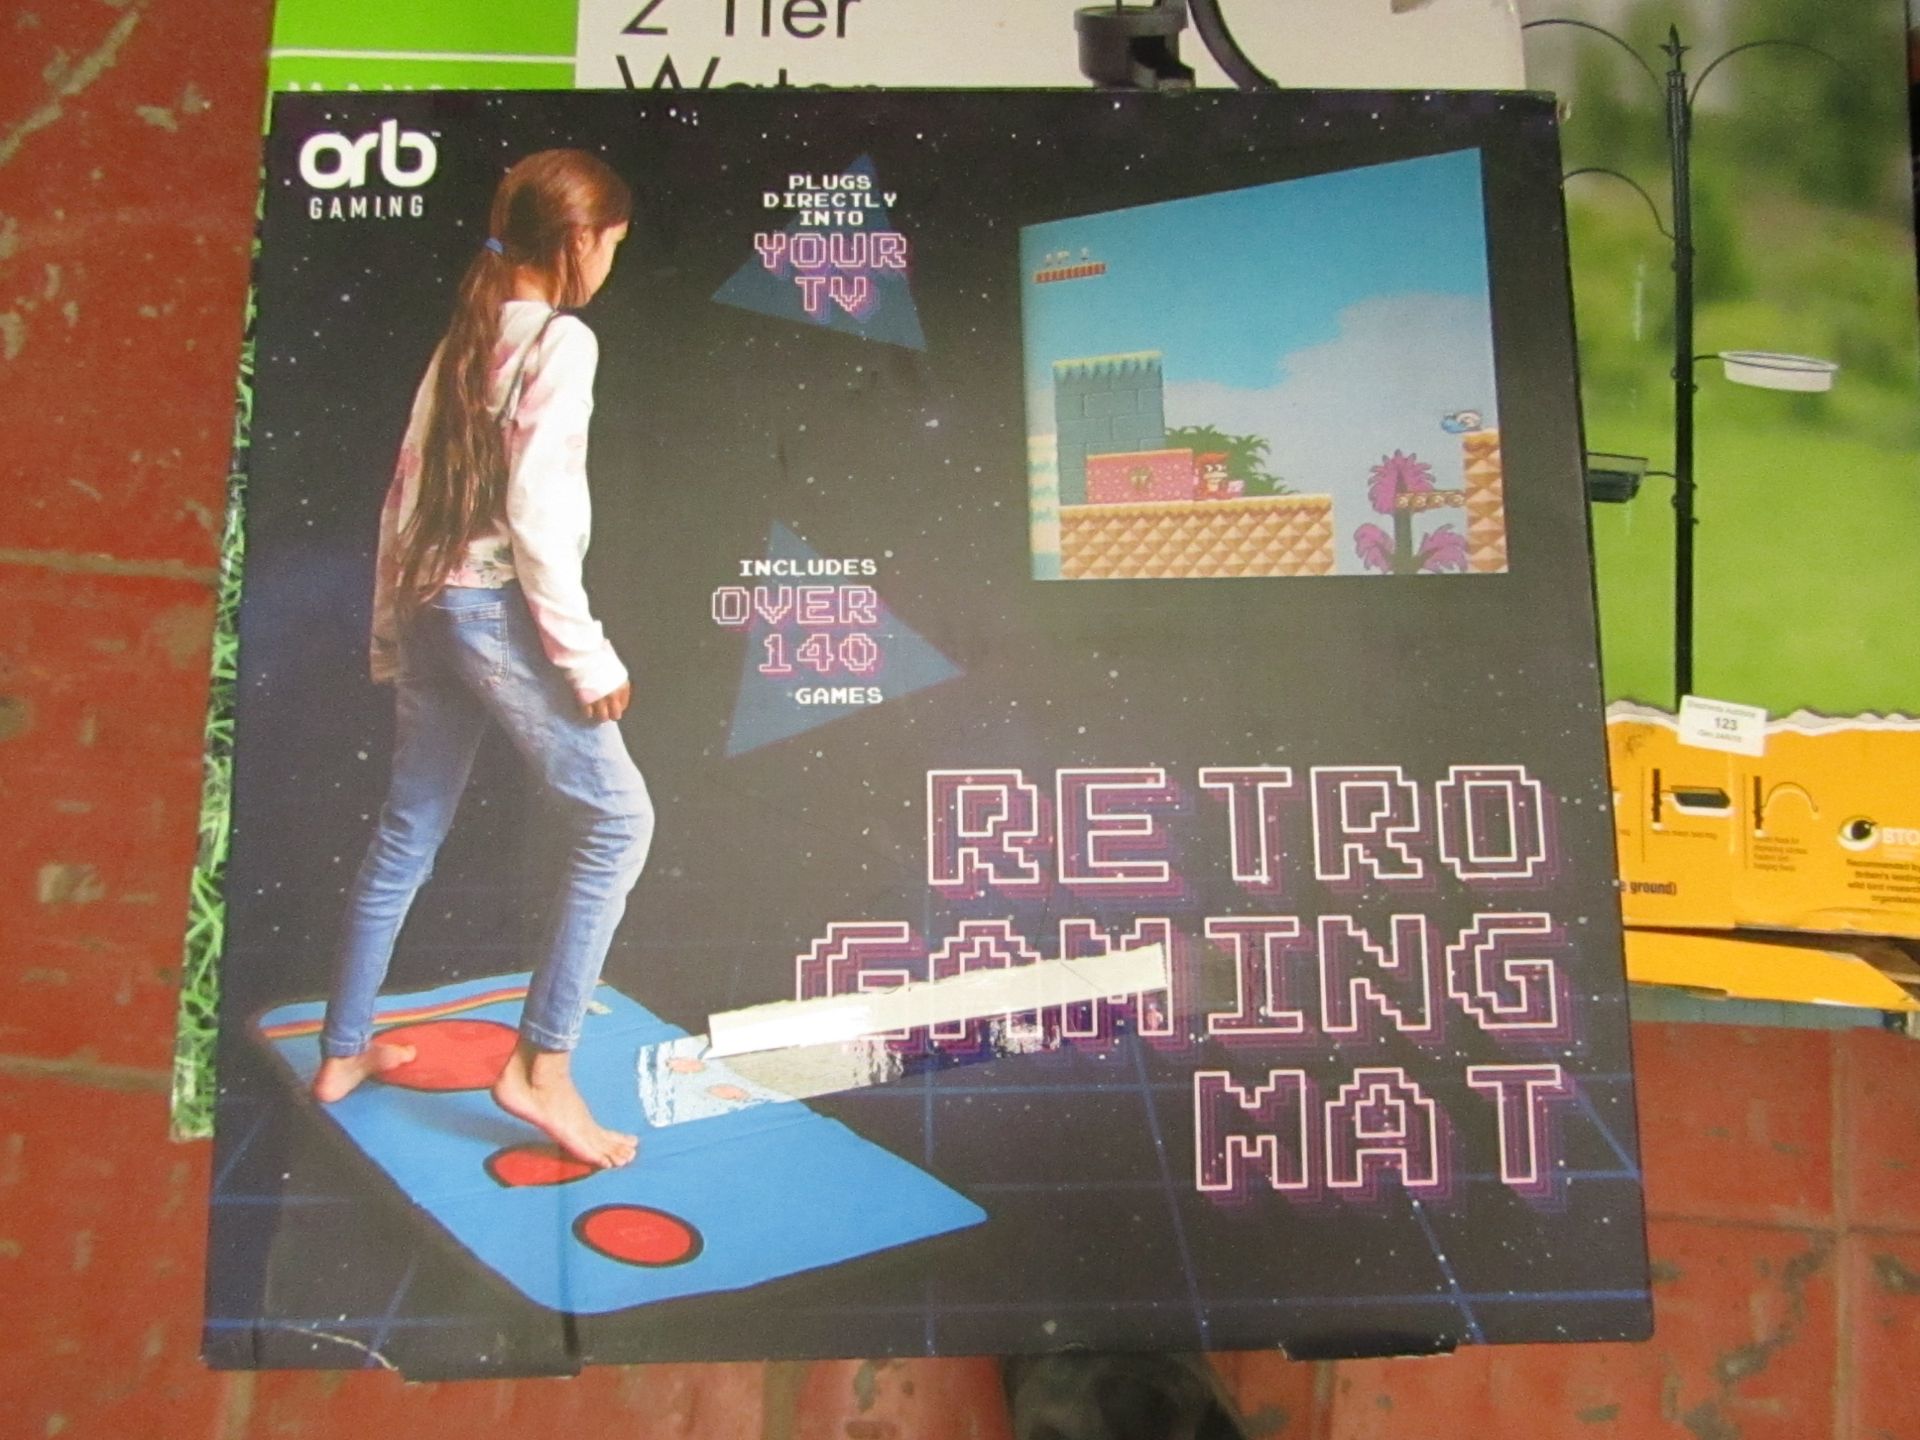 Orb gaming retro gaming mat, unchecked and boxed.